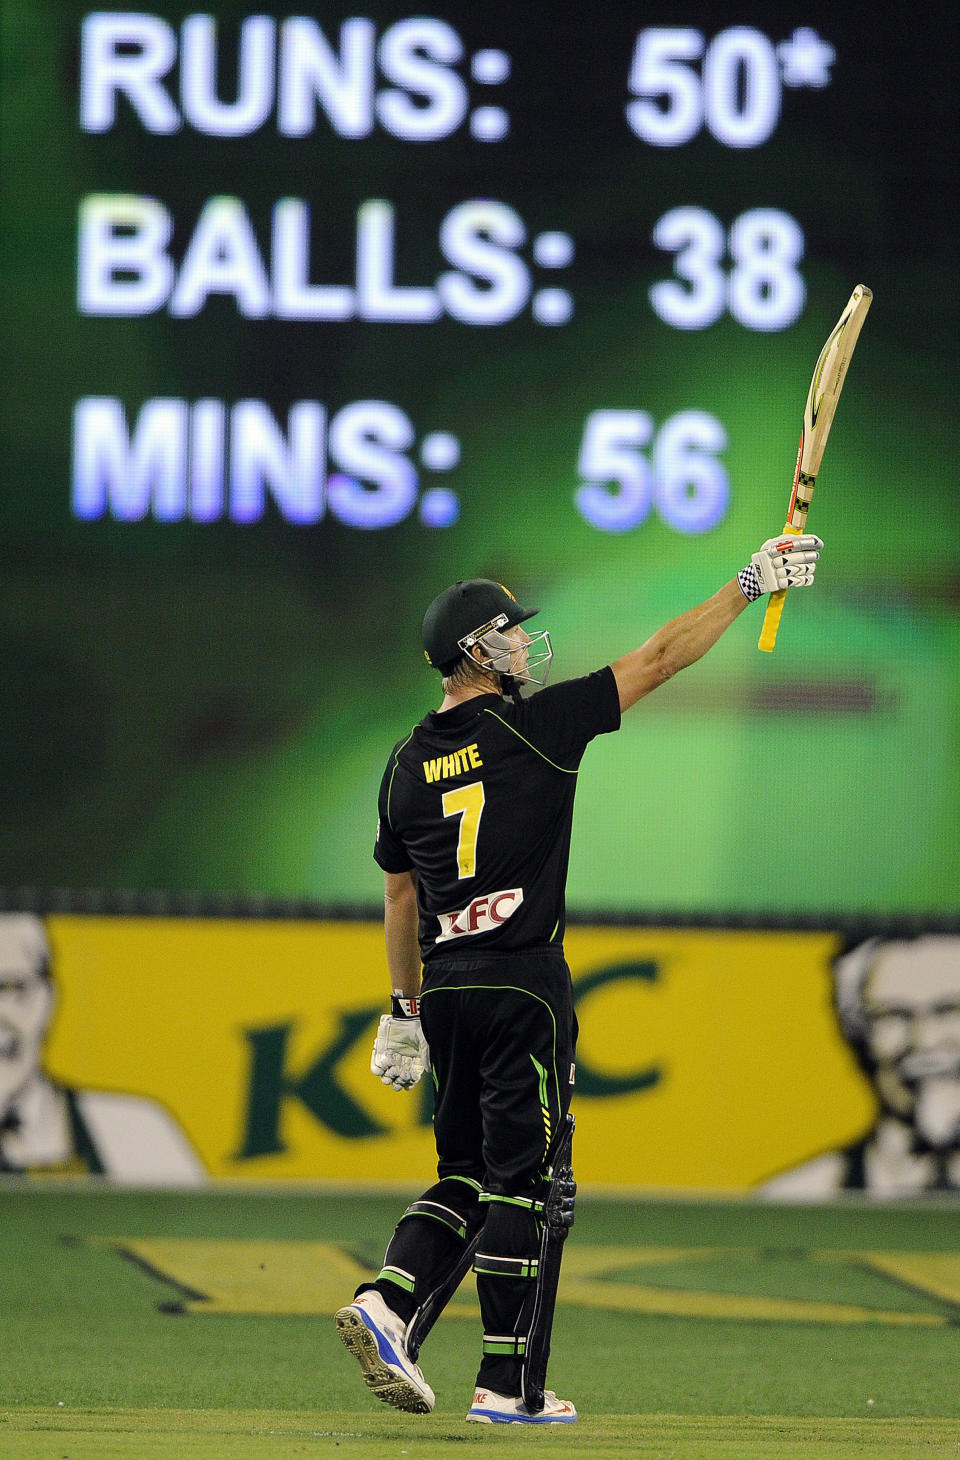 Australia's Cameron White celebrates after scoring 50 runs during the T20 International cricket match against England at the Melbourne Cricket Ground in Melbourne, Australia, Friday, Jan. 31, 2014. (AP Photo/Andy Brownbill)